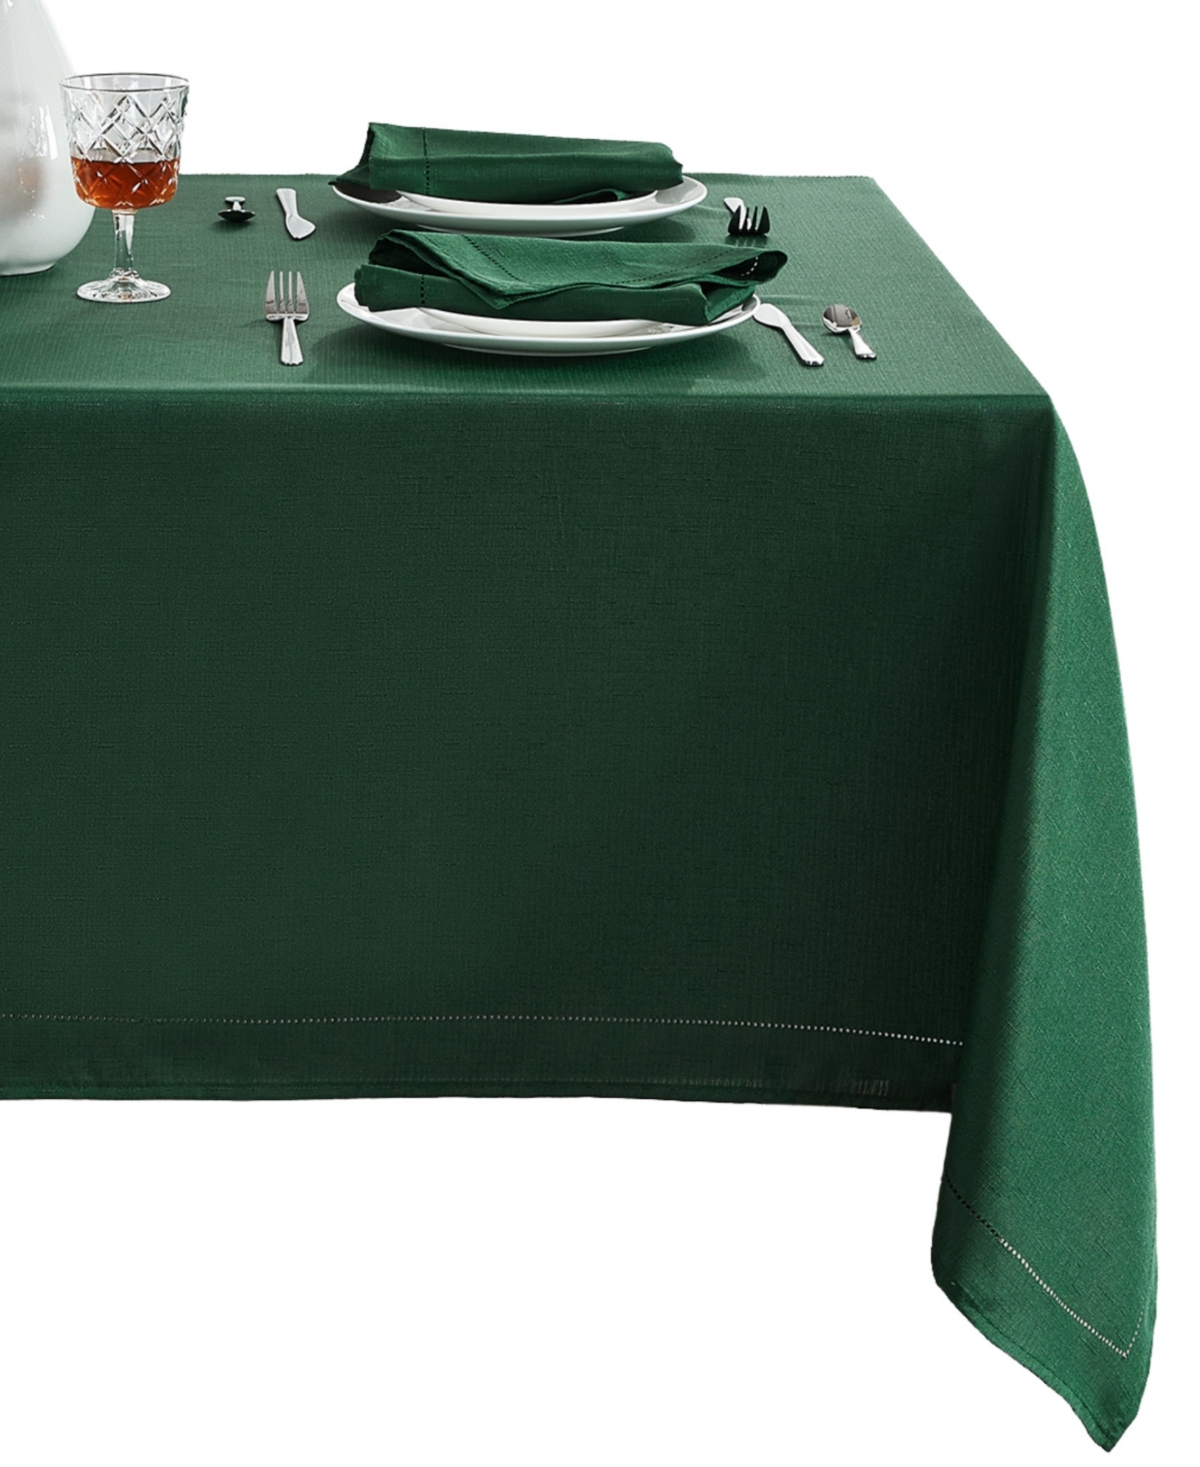 Elrene Alison Eyelet Punched Border Fabric Tablecloth, 60" X 102" In Forest